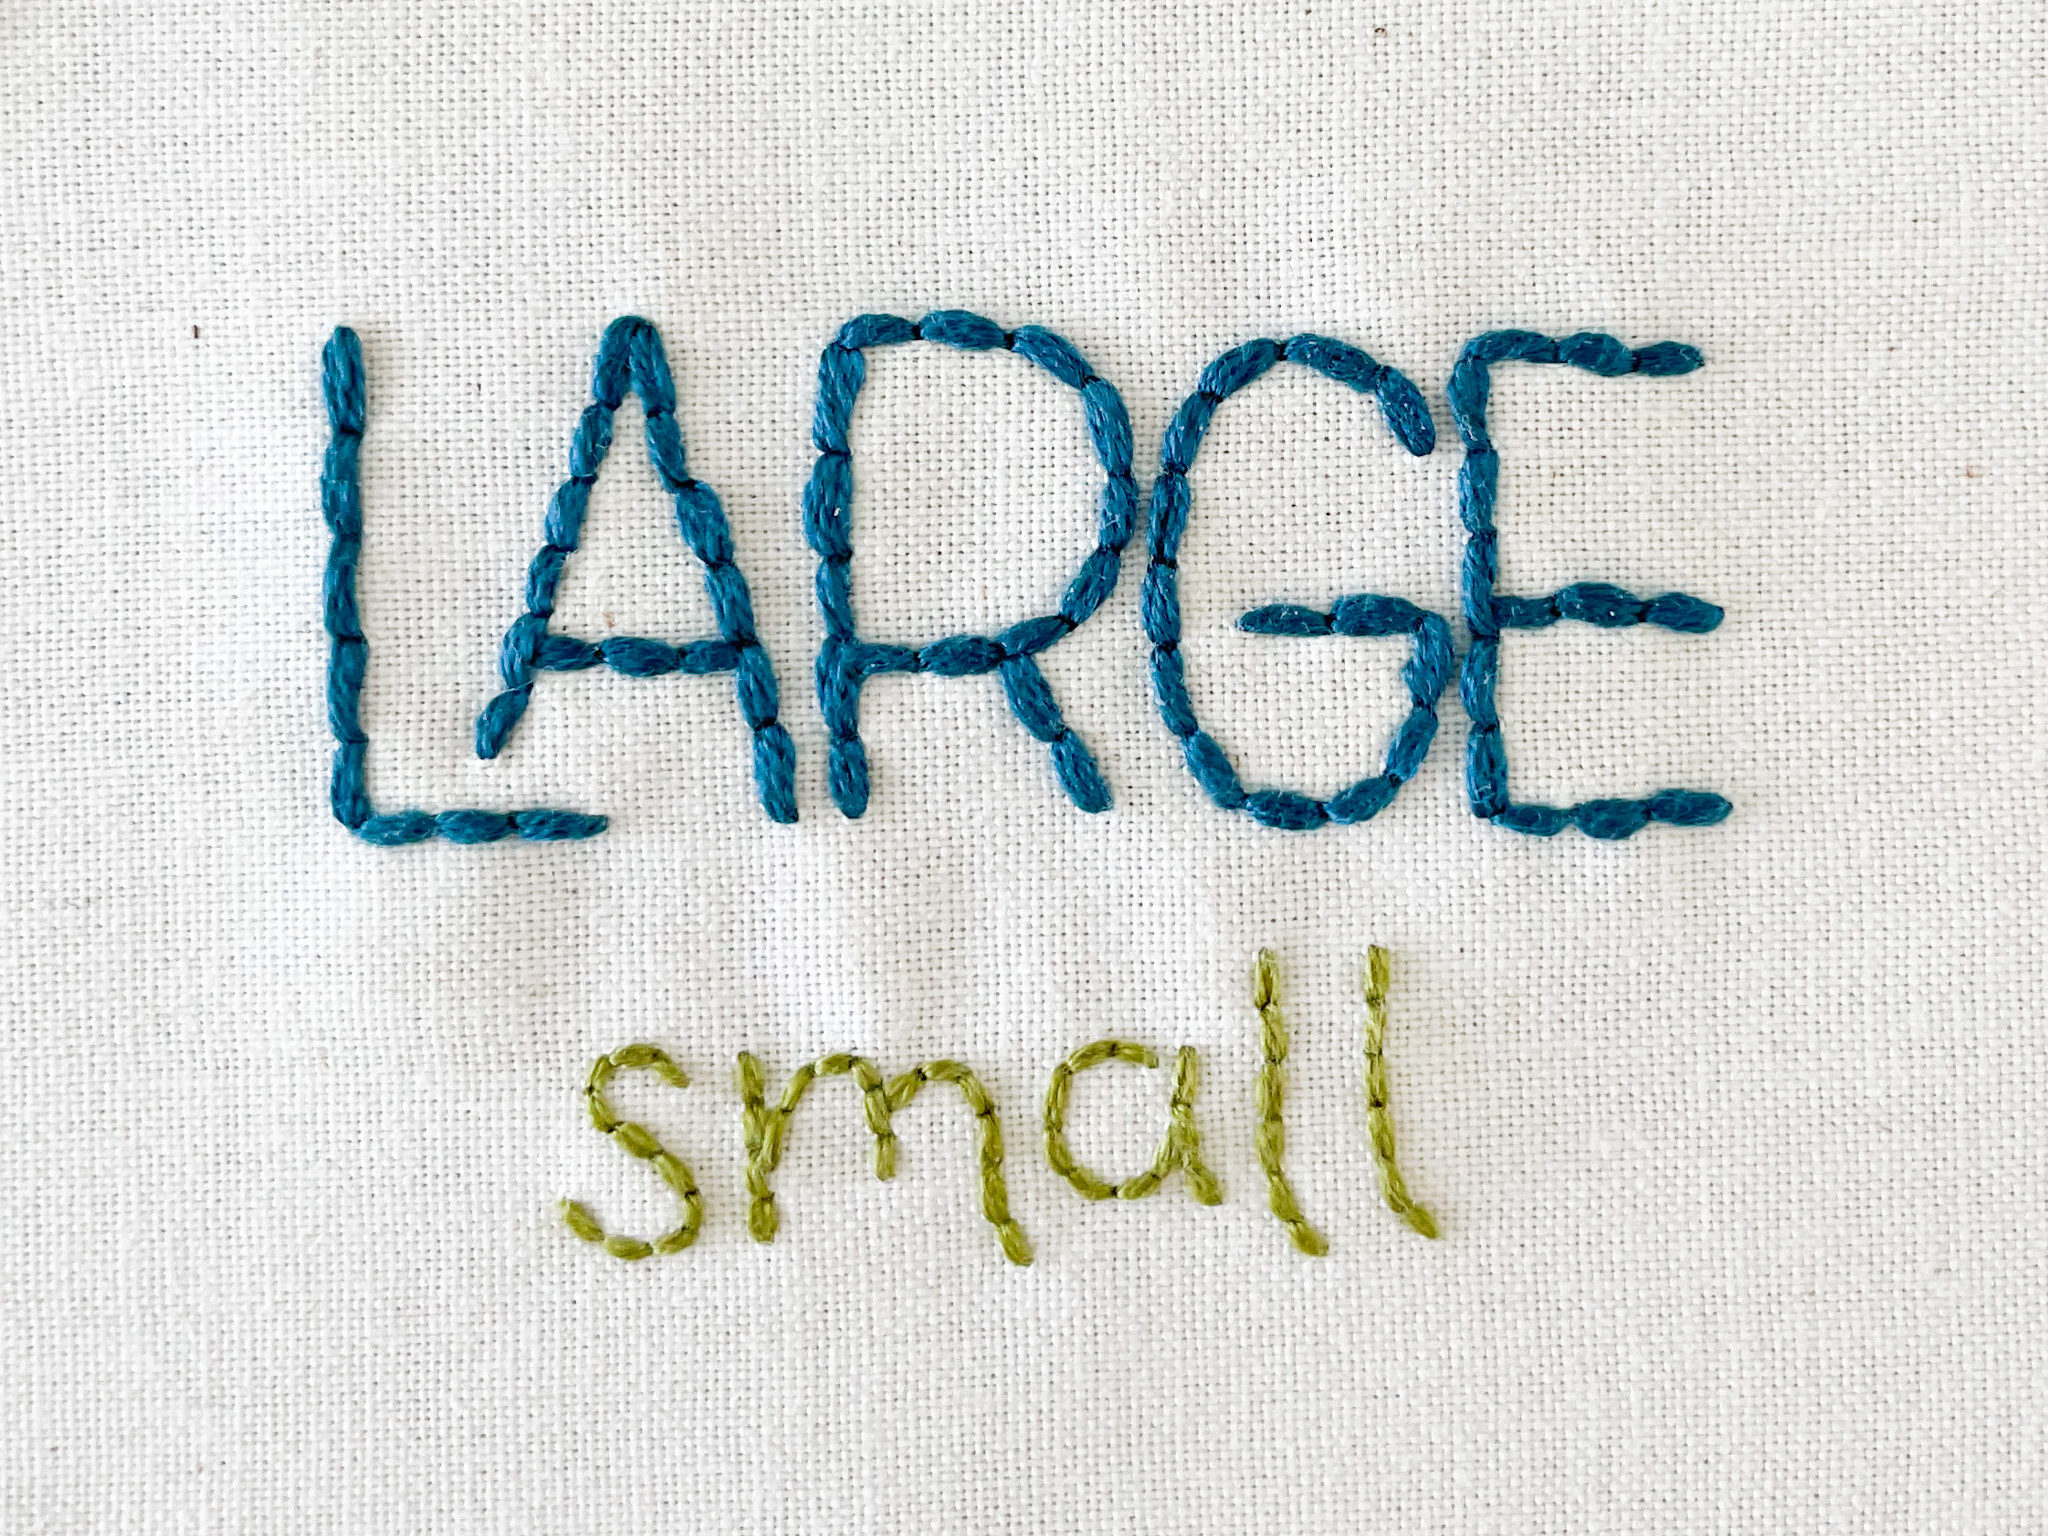 The words "Large" and "small" stitching on fabric.